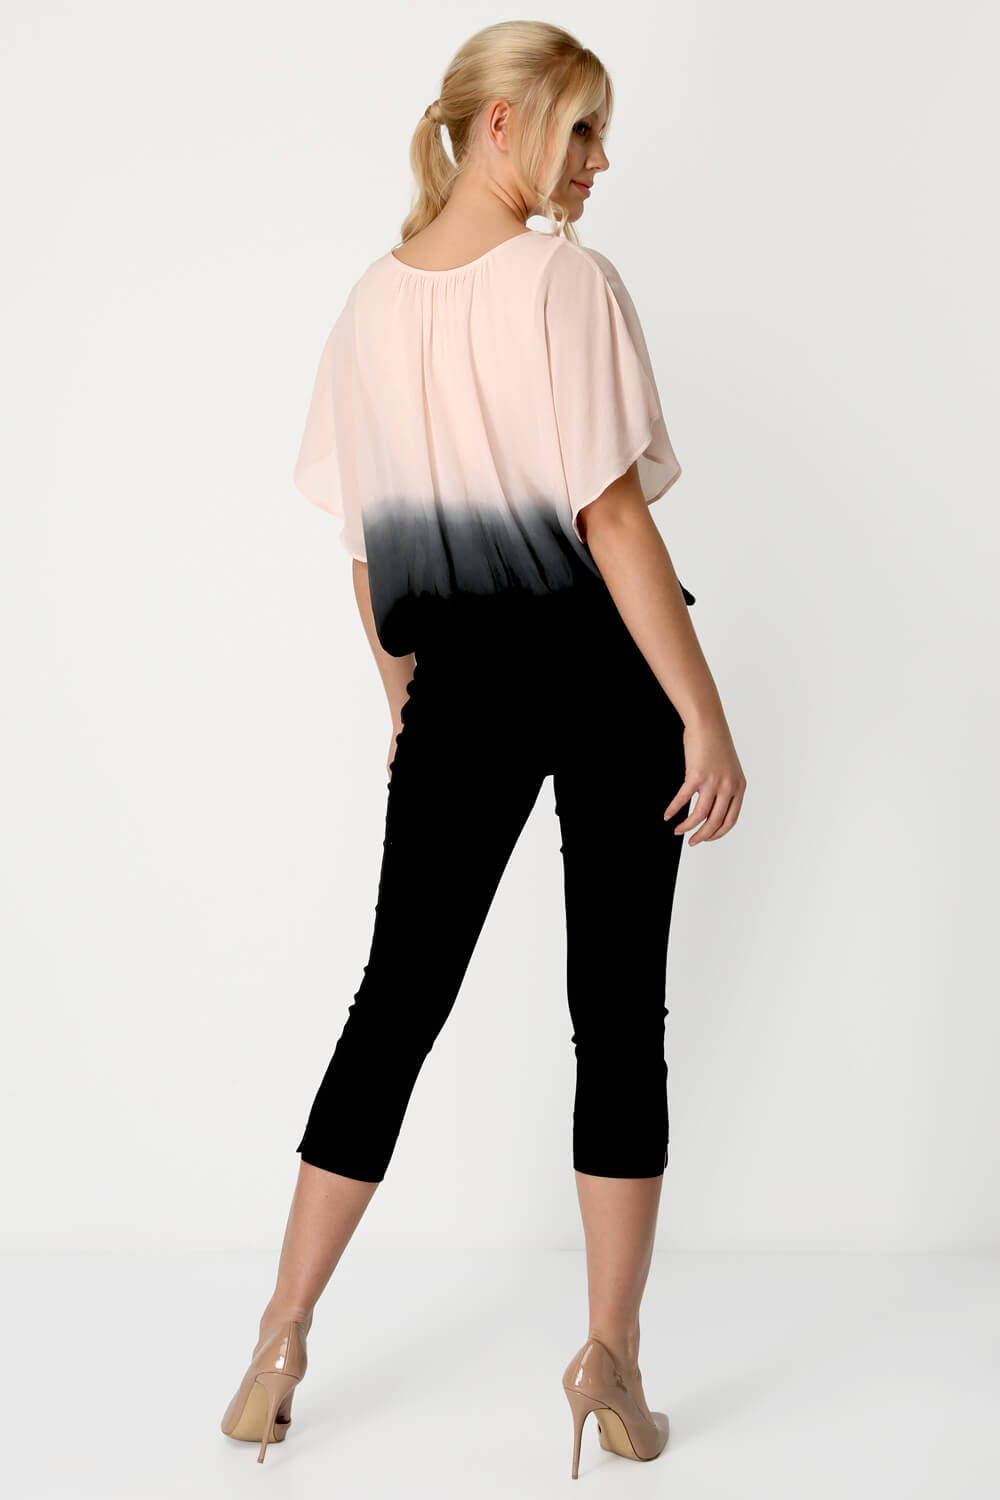 PINK Ombre Batwing Top, Image 3 of 8